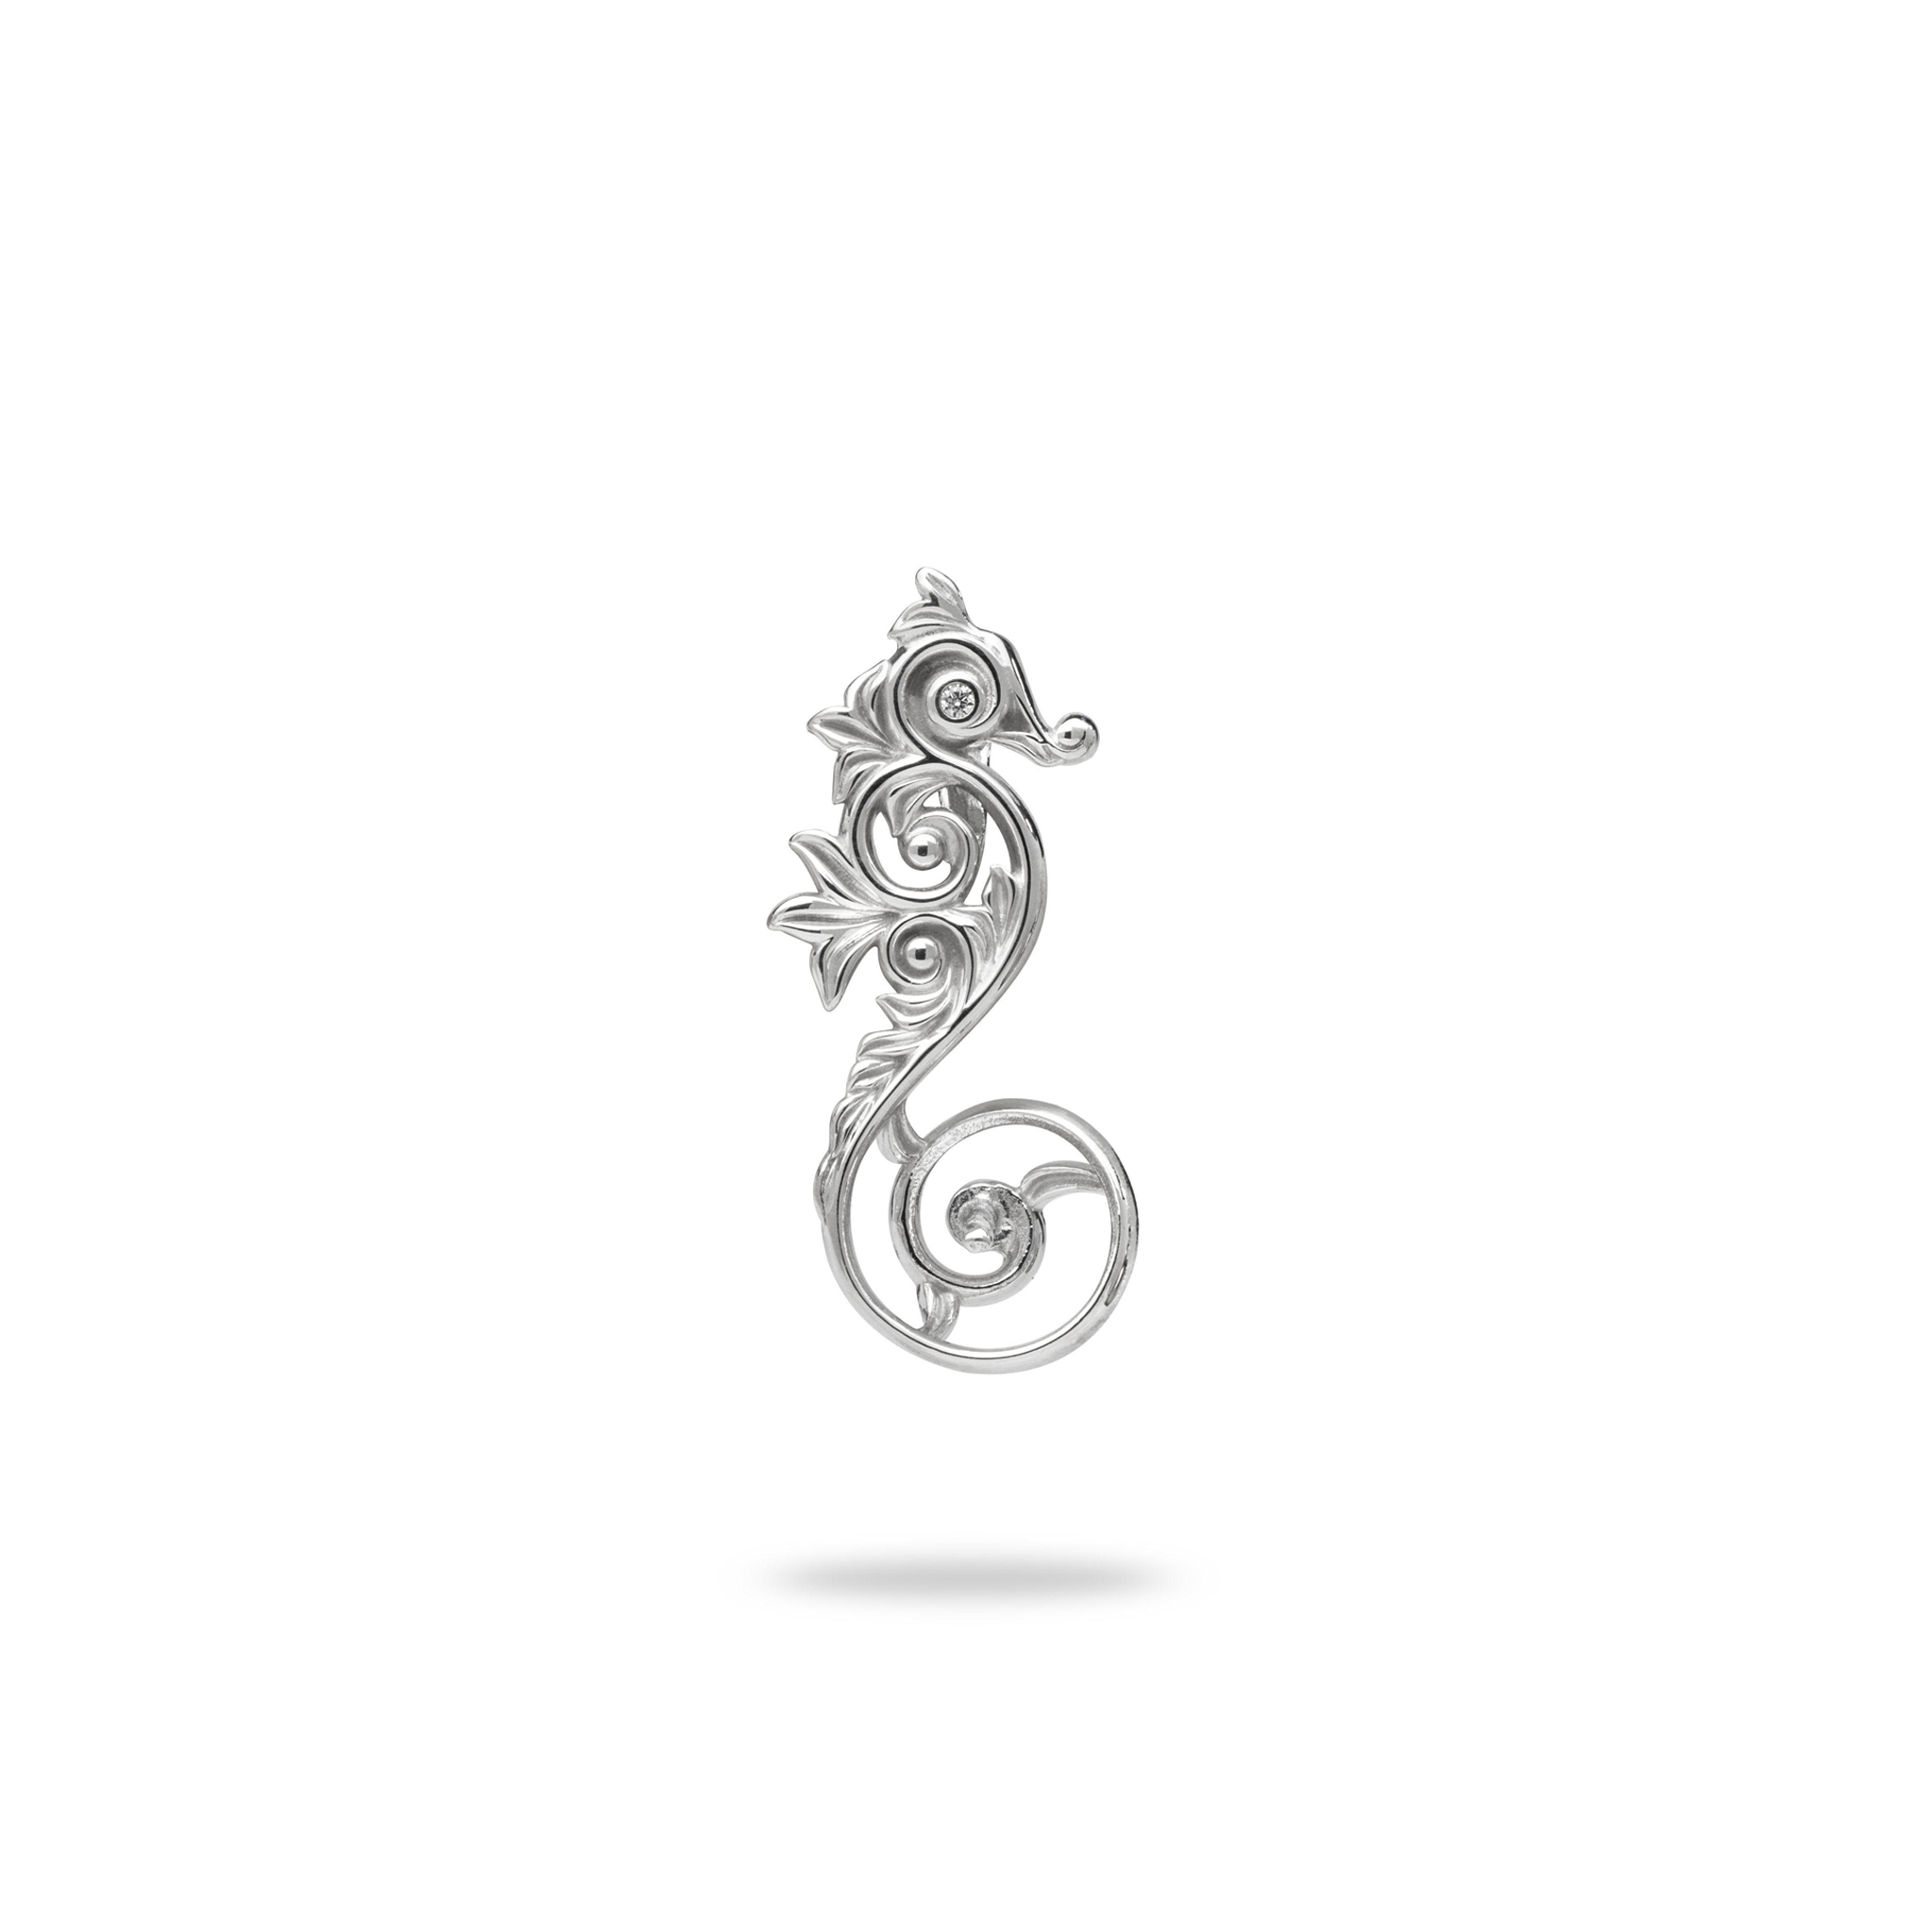 Pick A Pearl Living Heirloom Seahorse Pendant in Sterling Silver - 24mm